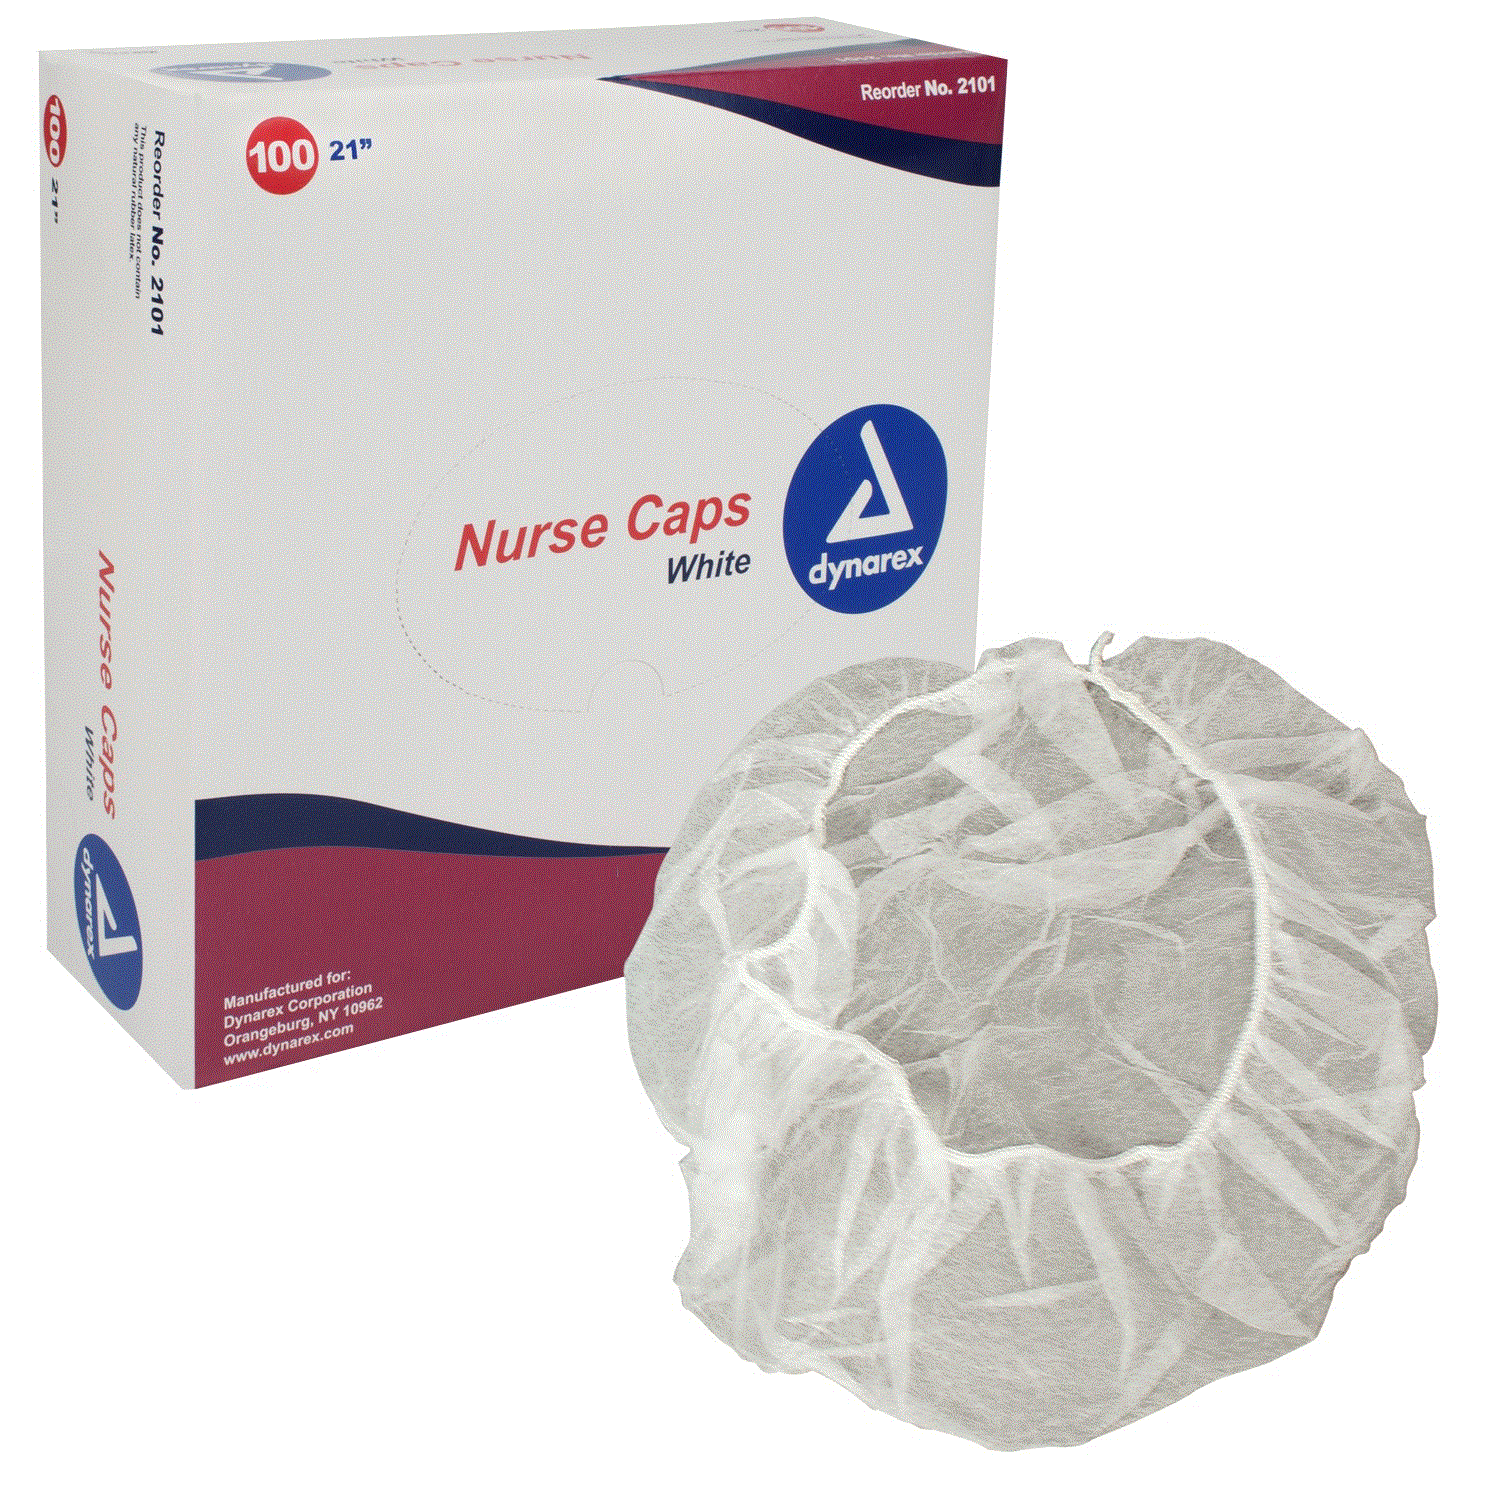 Nurse Caps Products, Supplies and Equipment